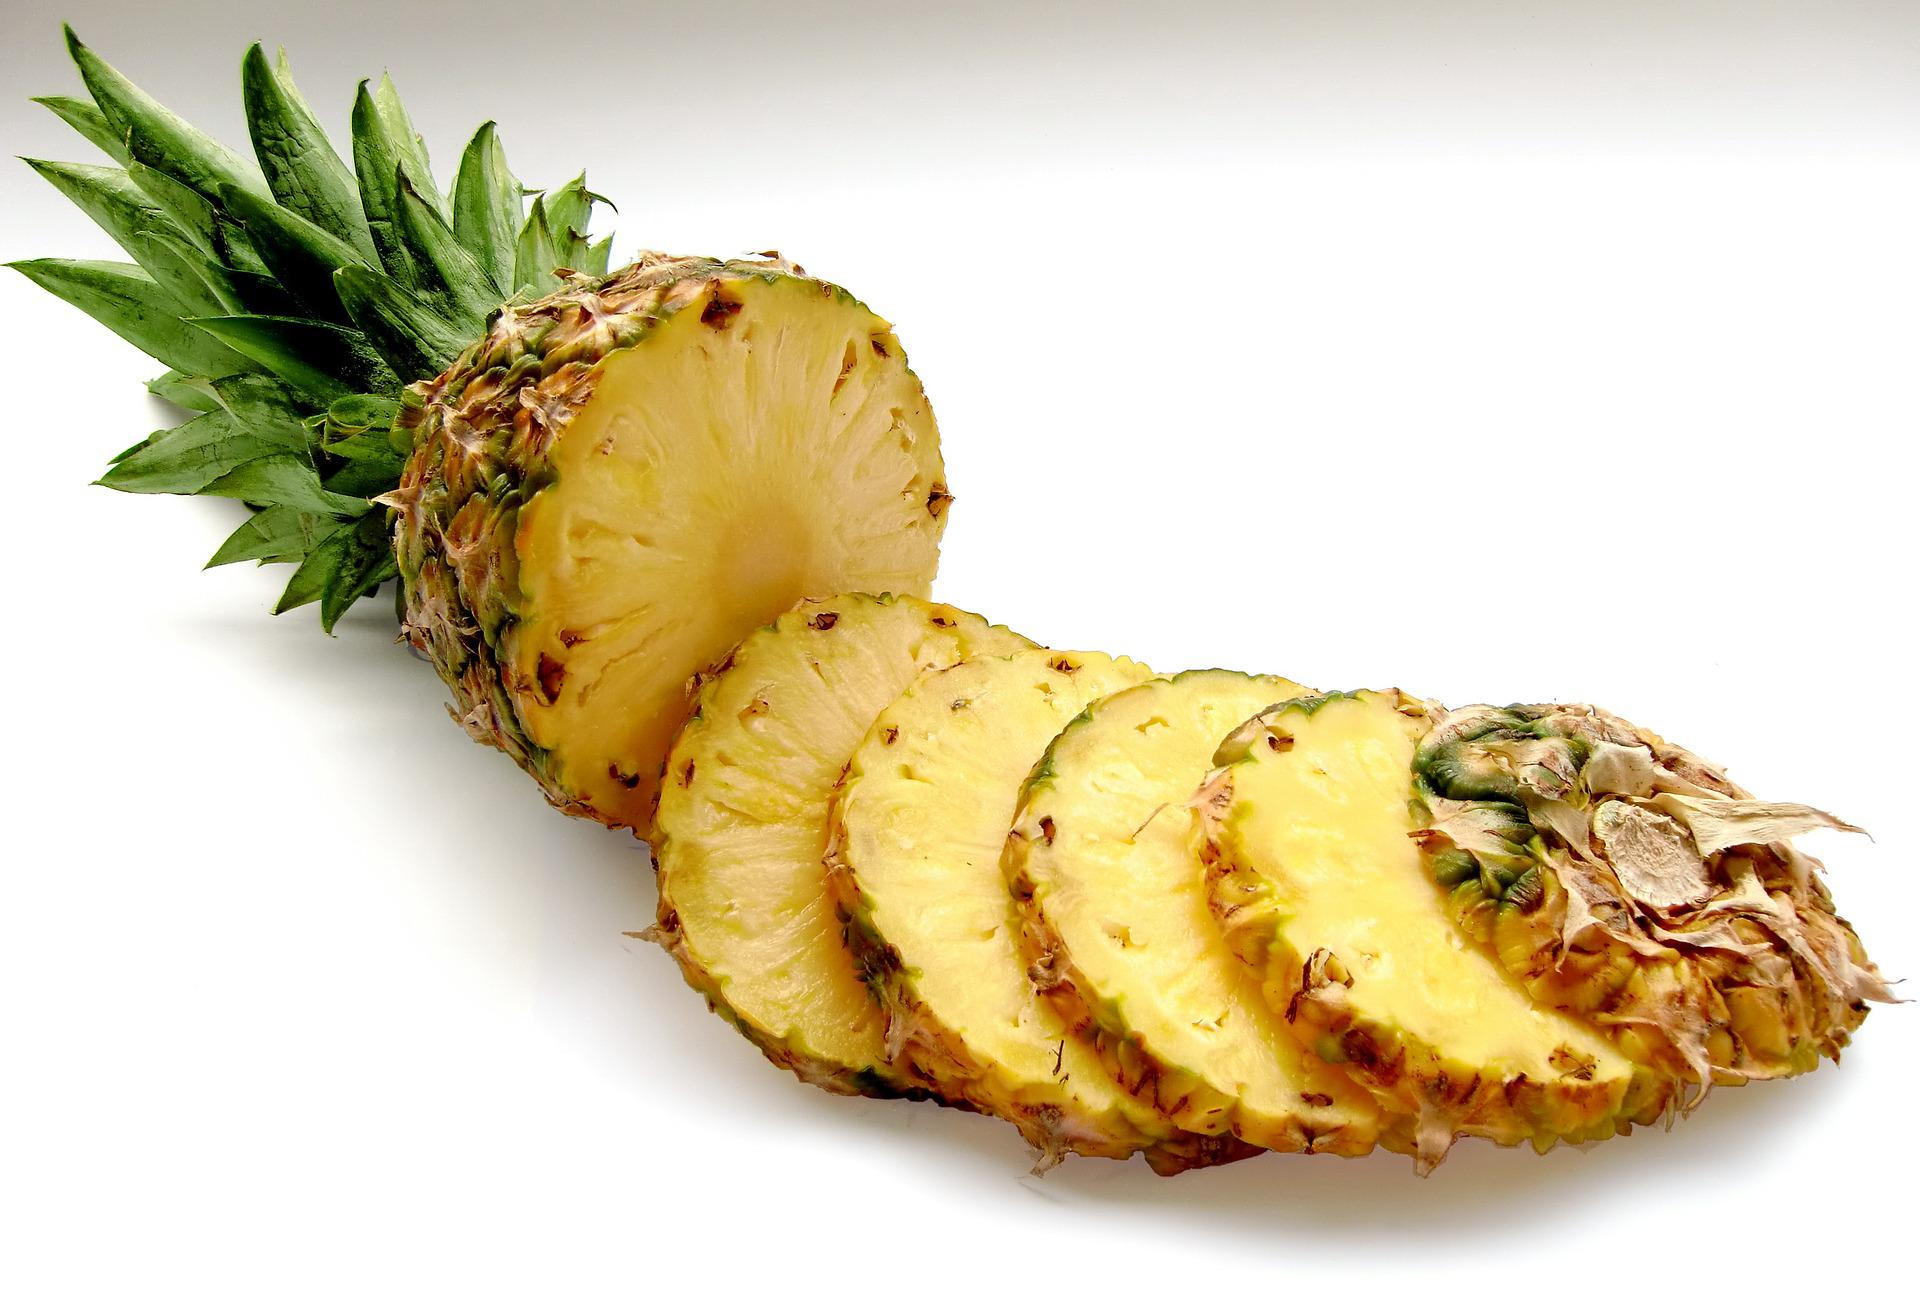  Pineapple  Juice Concentrate - 